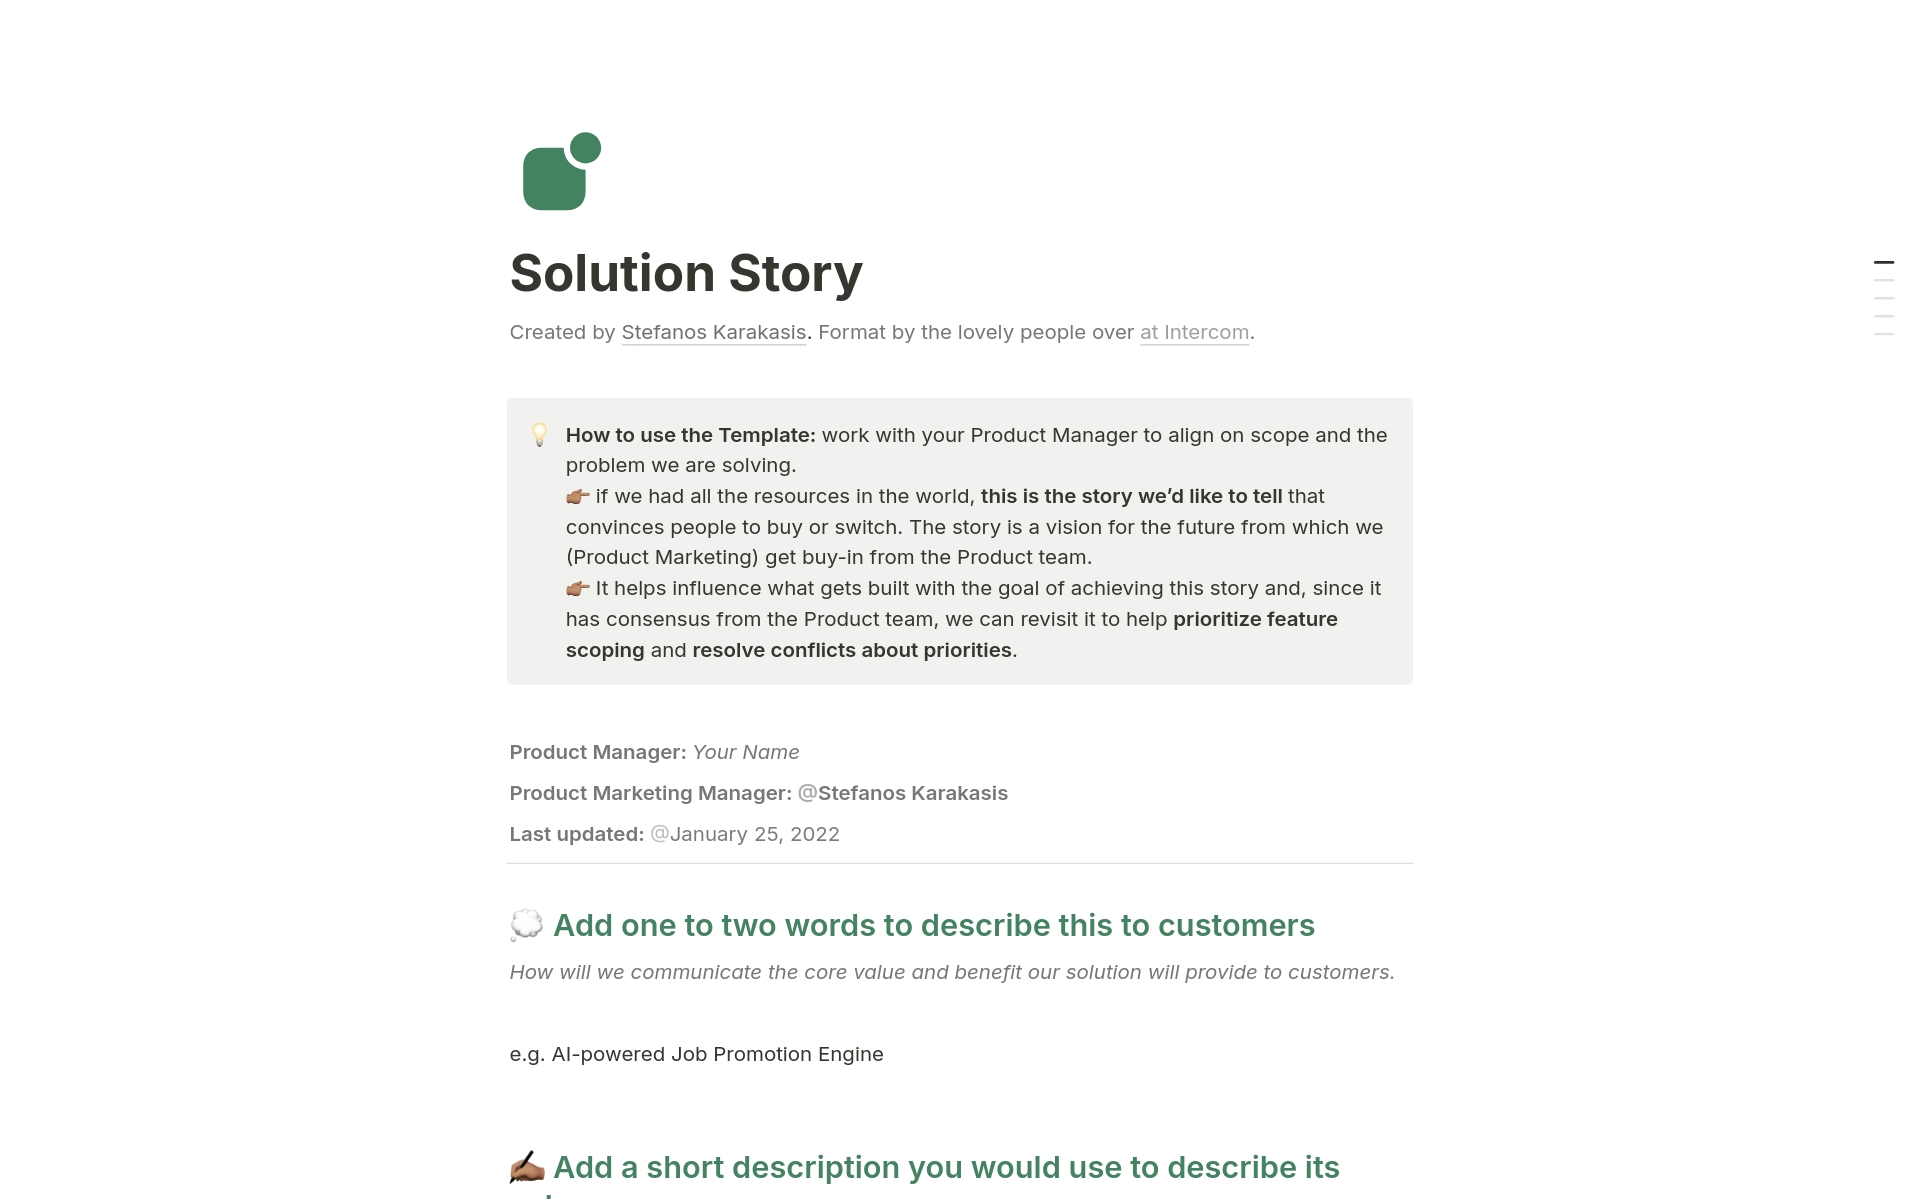 Solution Story: One-Page Product Messaging Brief님의 템플릿 미리보기